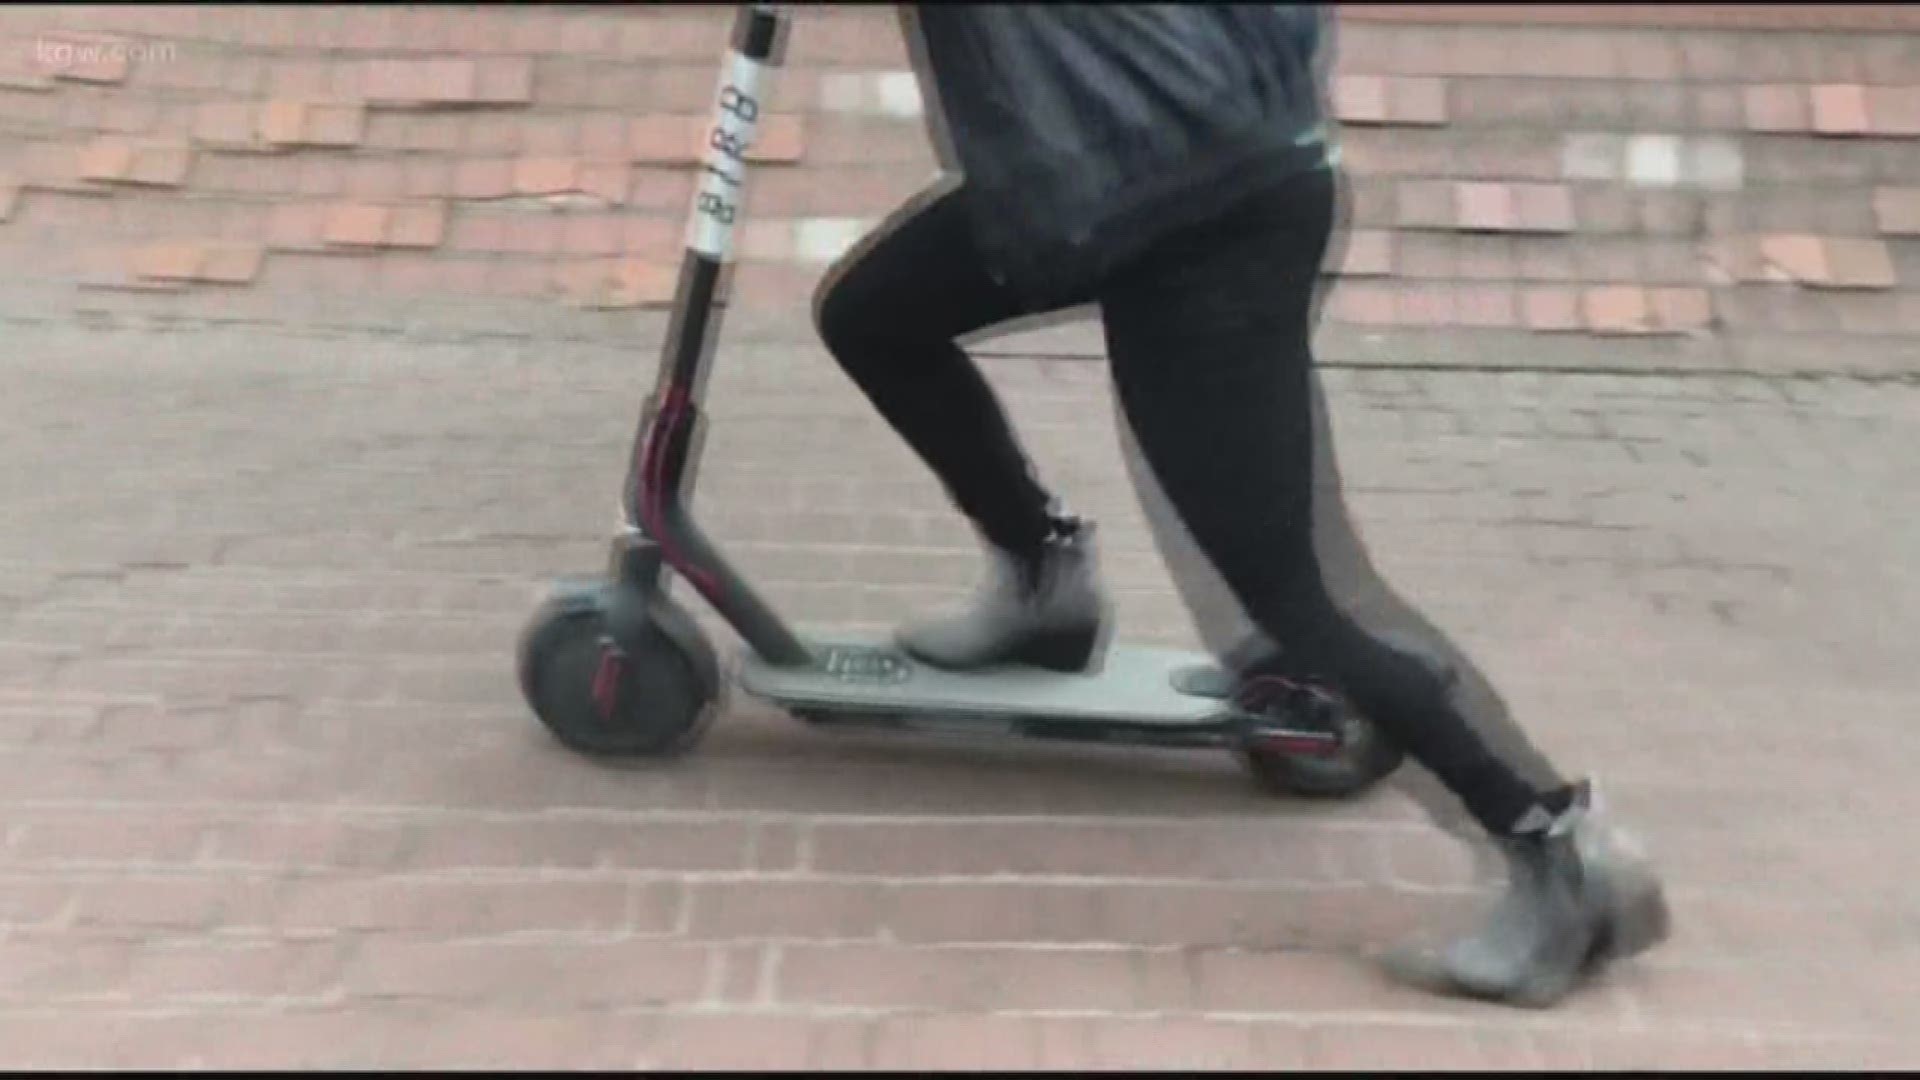 We had fun with the e-scooters in Portland while they lasted. We'll have to wait and see if we'll ever meet again.
#TonightwithCassidy